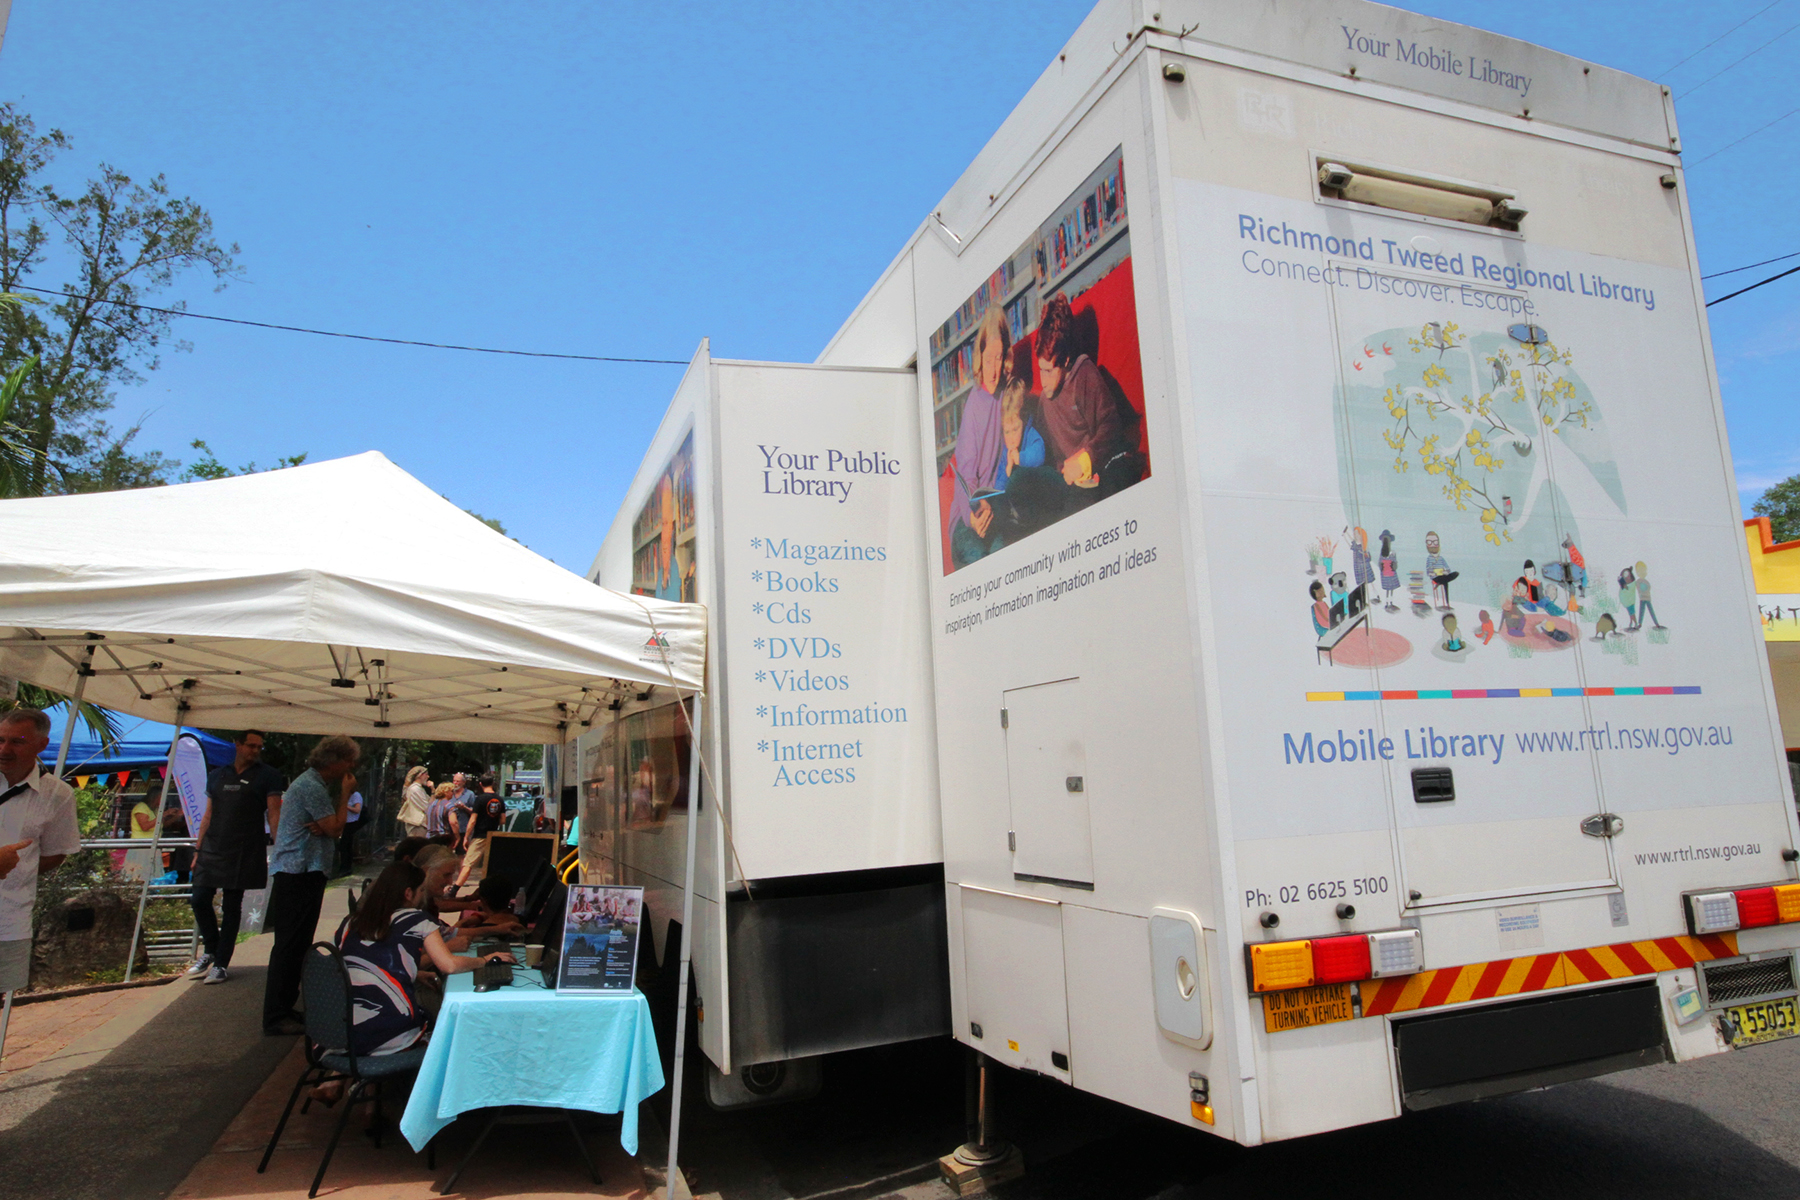 The Richmond Tweed Regional Library mobile library